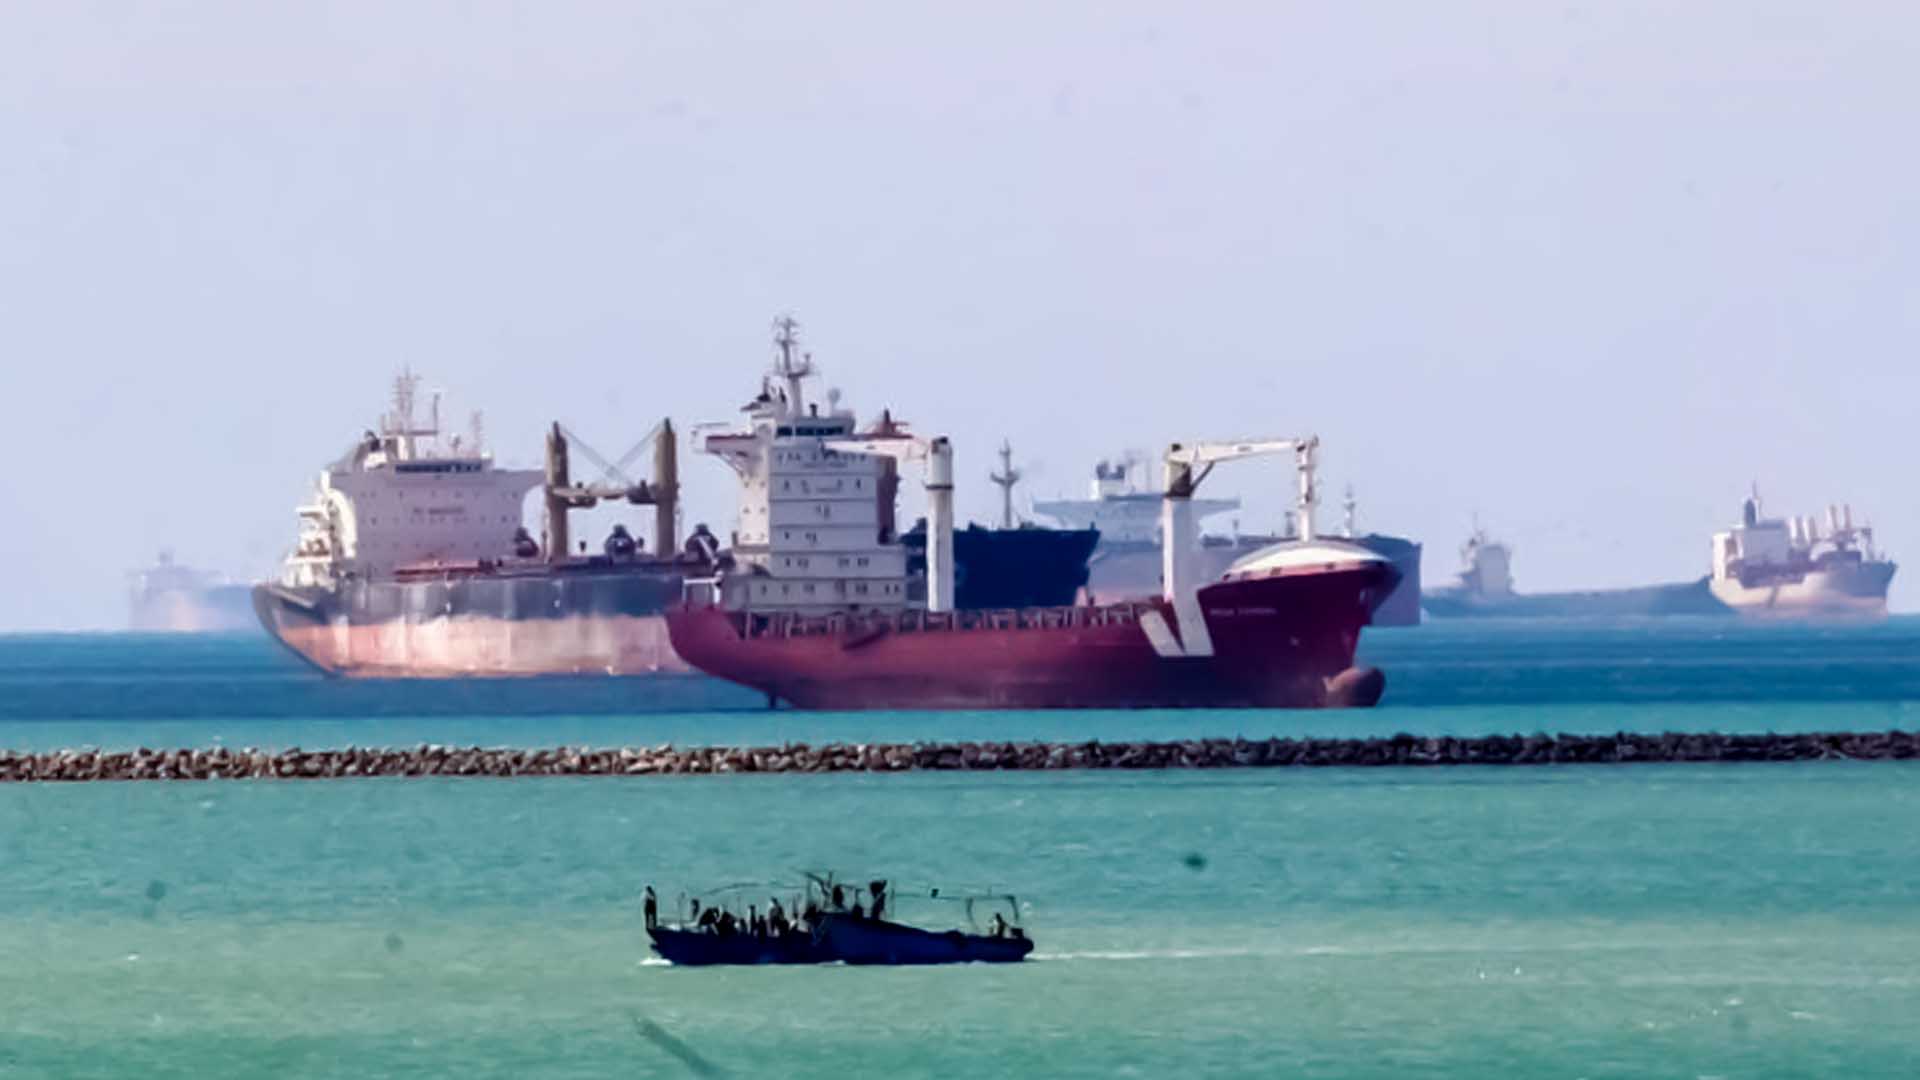 Egyptian canal authority re-floats tanker after it runs aground in the Suez Canal